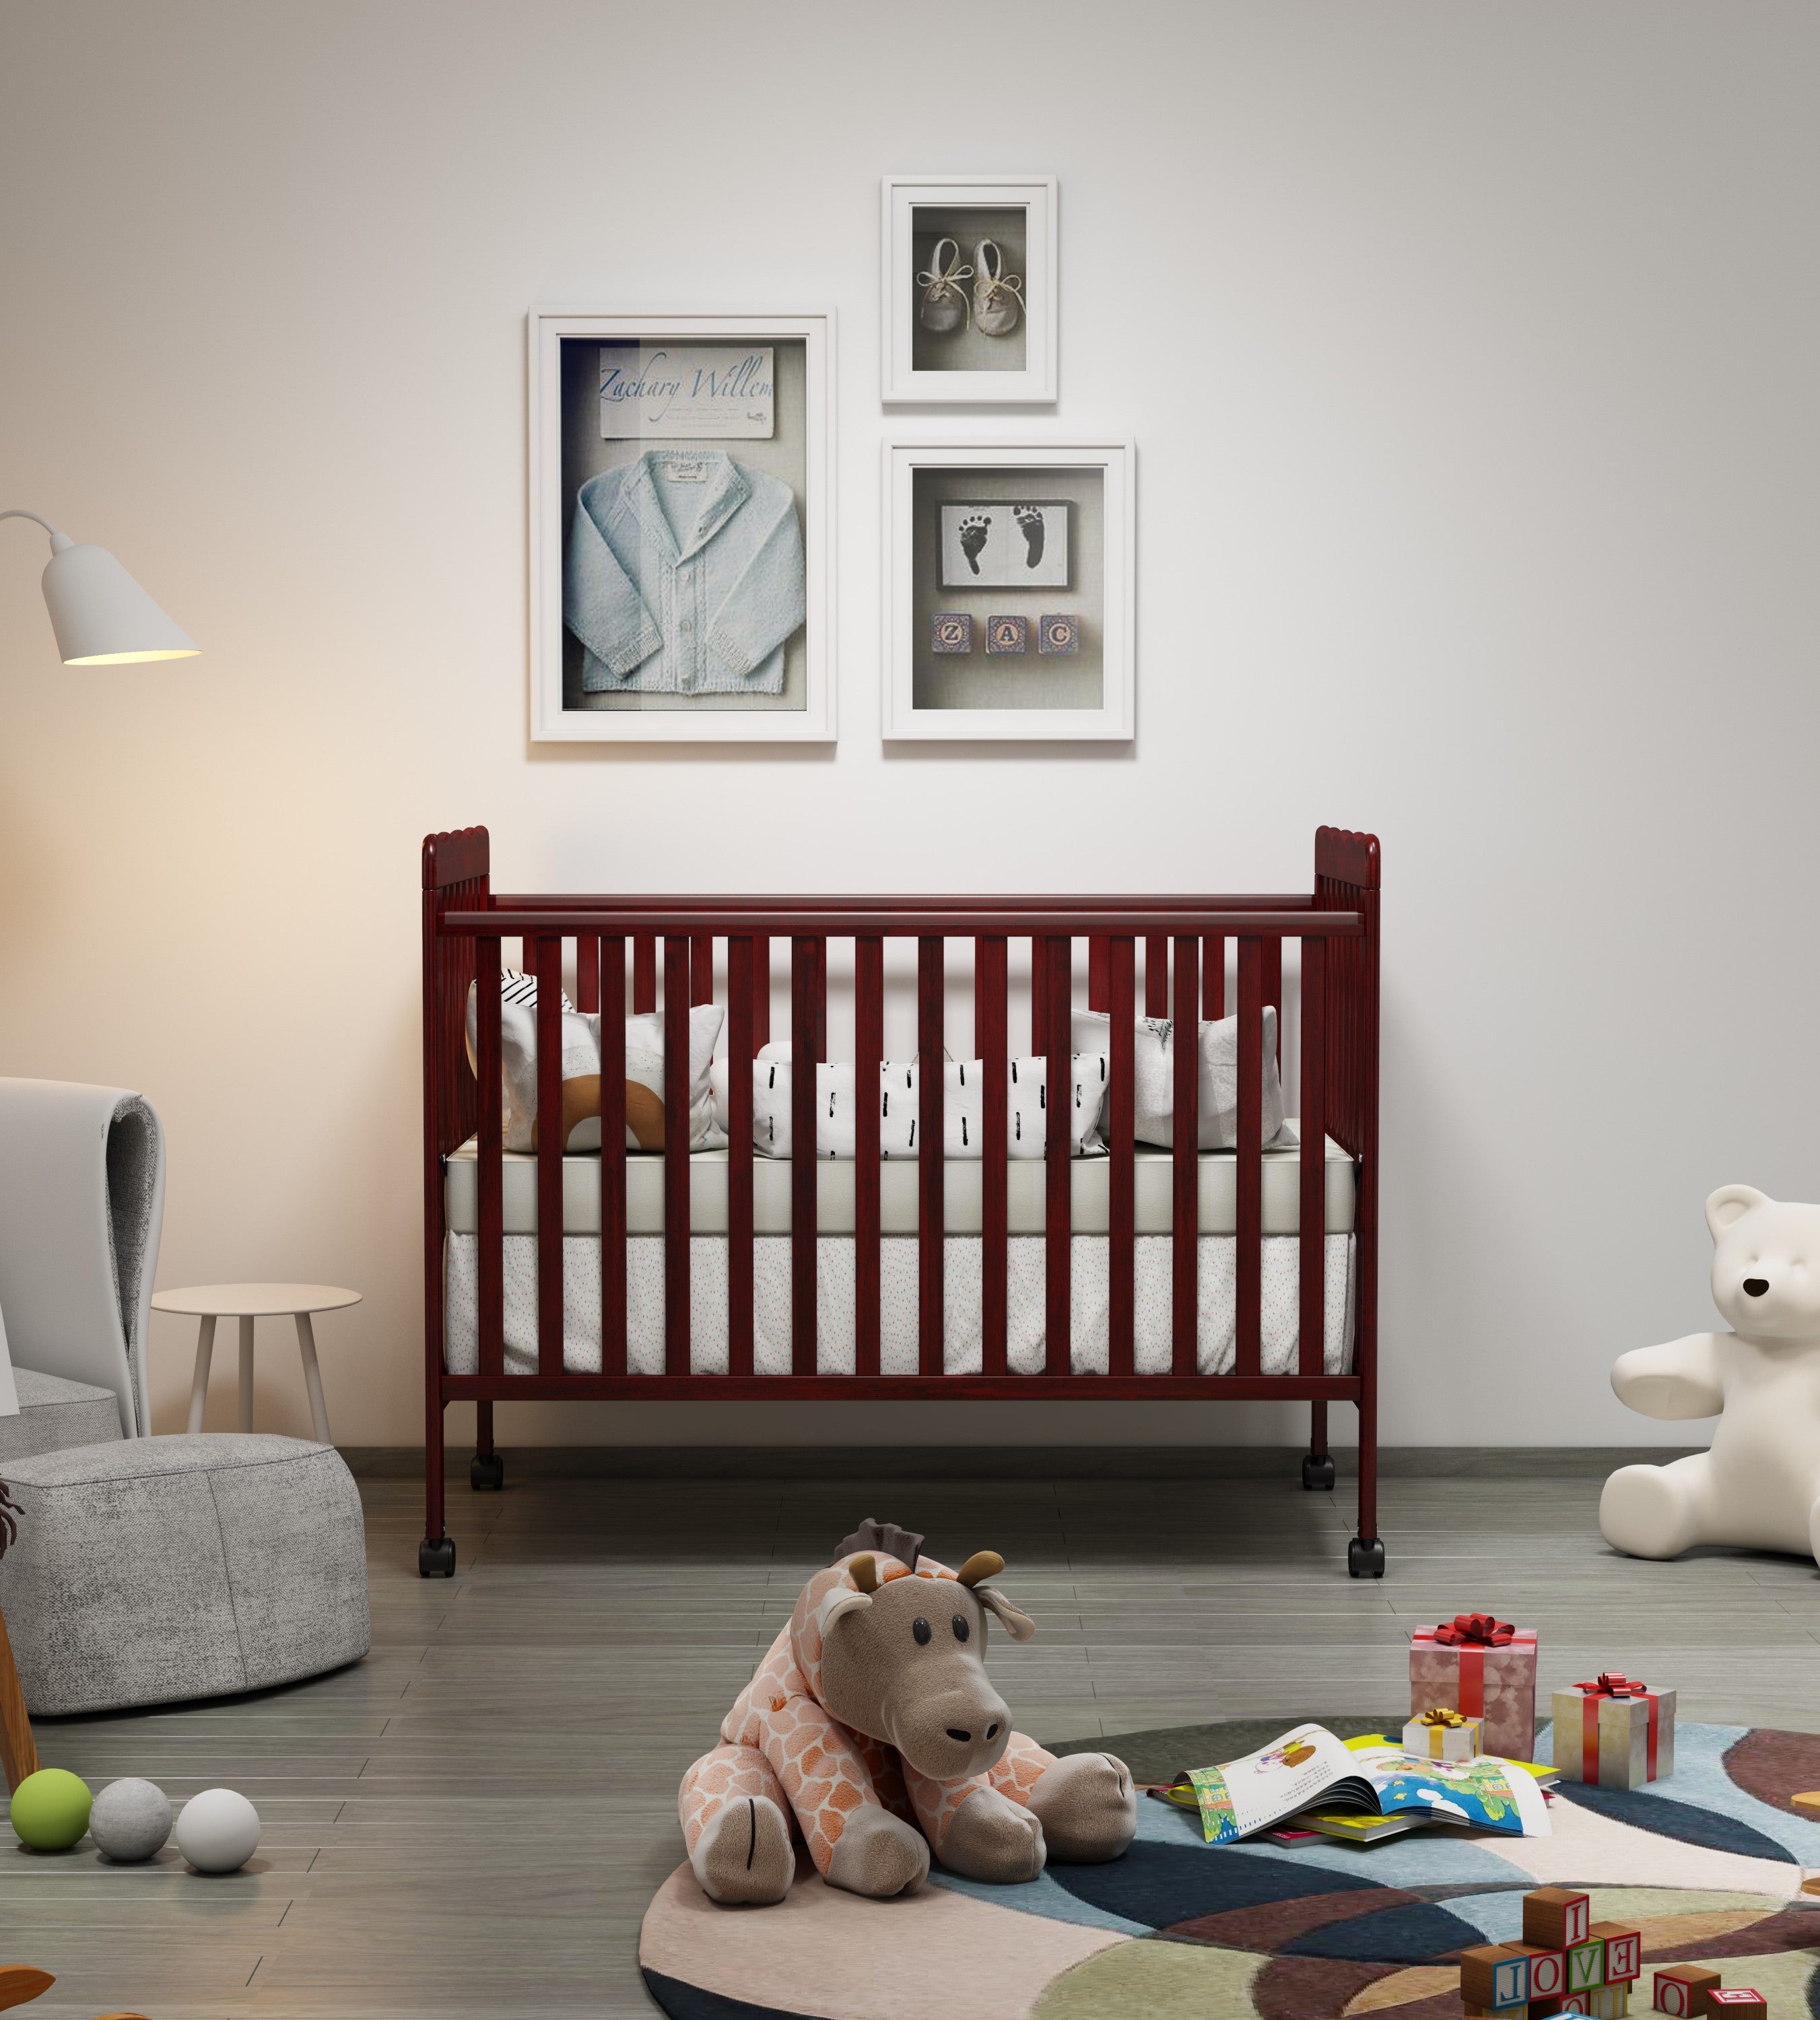 3-In-1 Convertible Crib In Espresso, Made Of Sustainable Pinewood, Non-Toxic Finish, Comes With Locking Wheels, Wooden Nursery Furniture